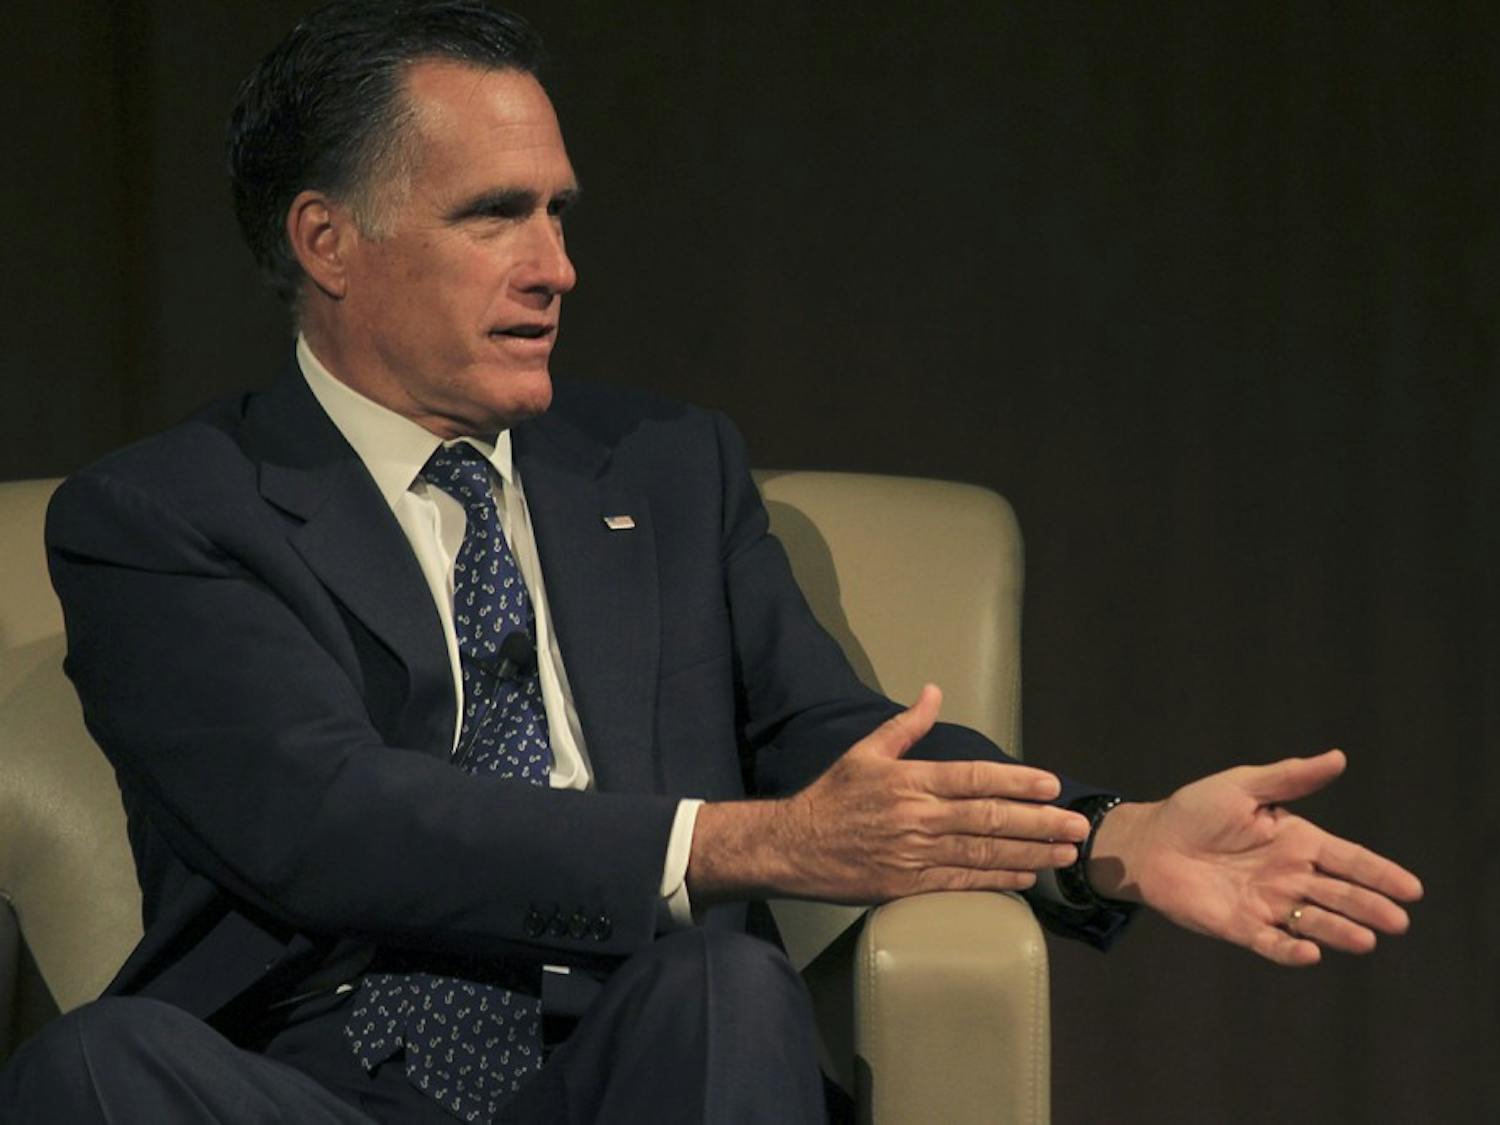 Governor Mitt Romney spook to students at Duke University Wednesday afternoon about public policy and foreign affairs.